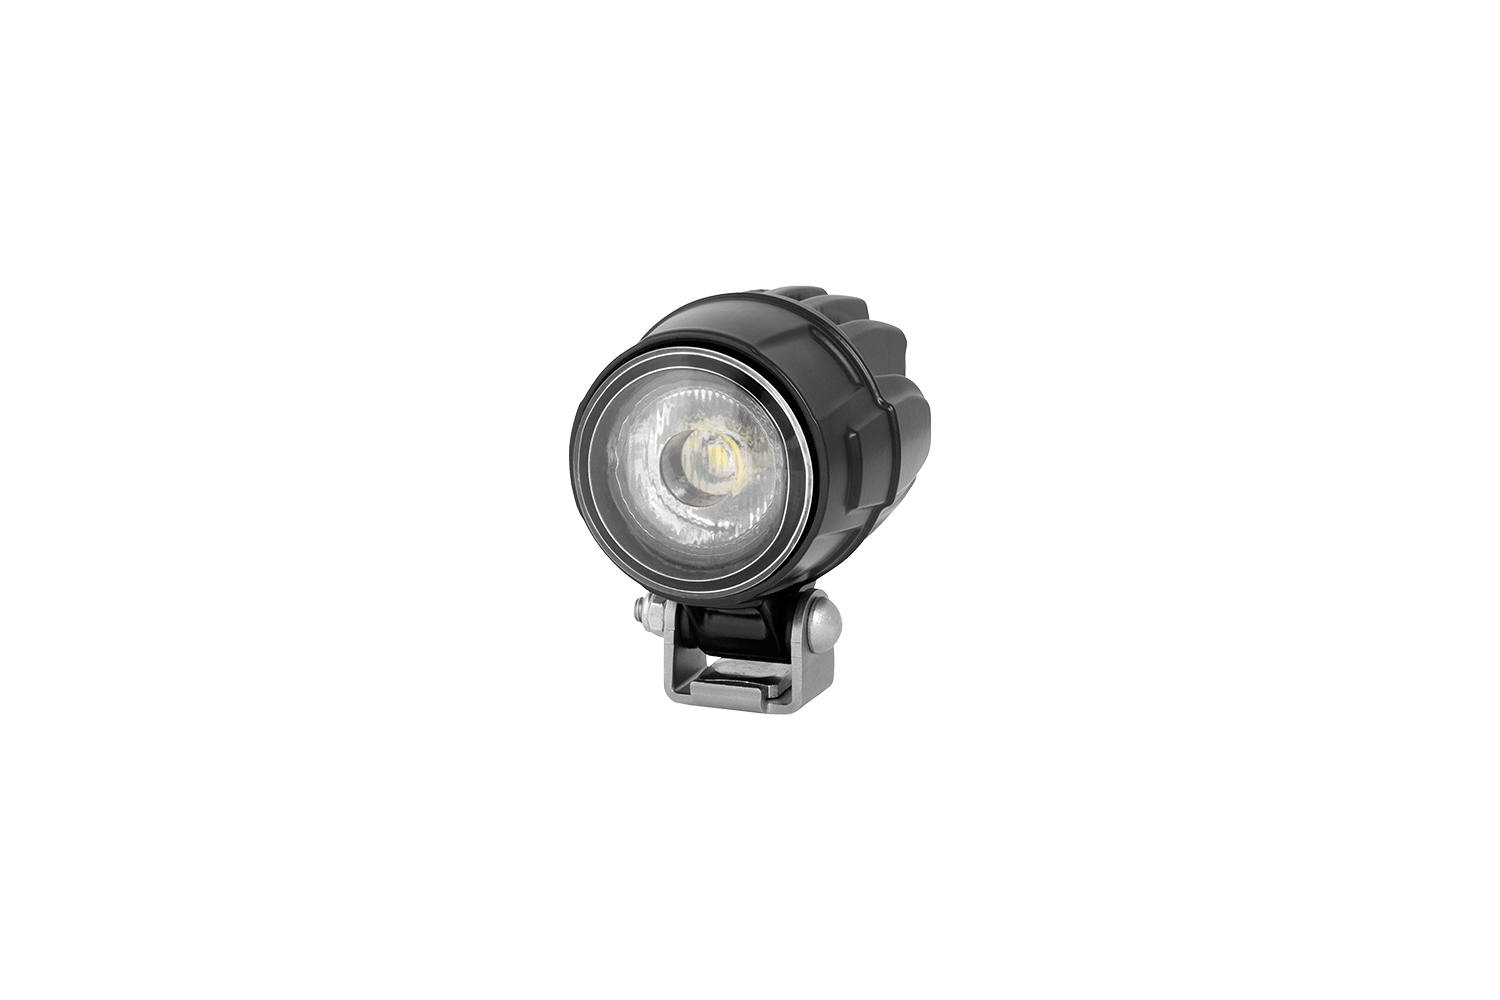 Module 50 LED work lamps from Hella offered by Patlon